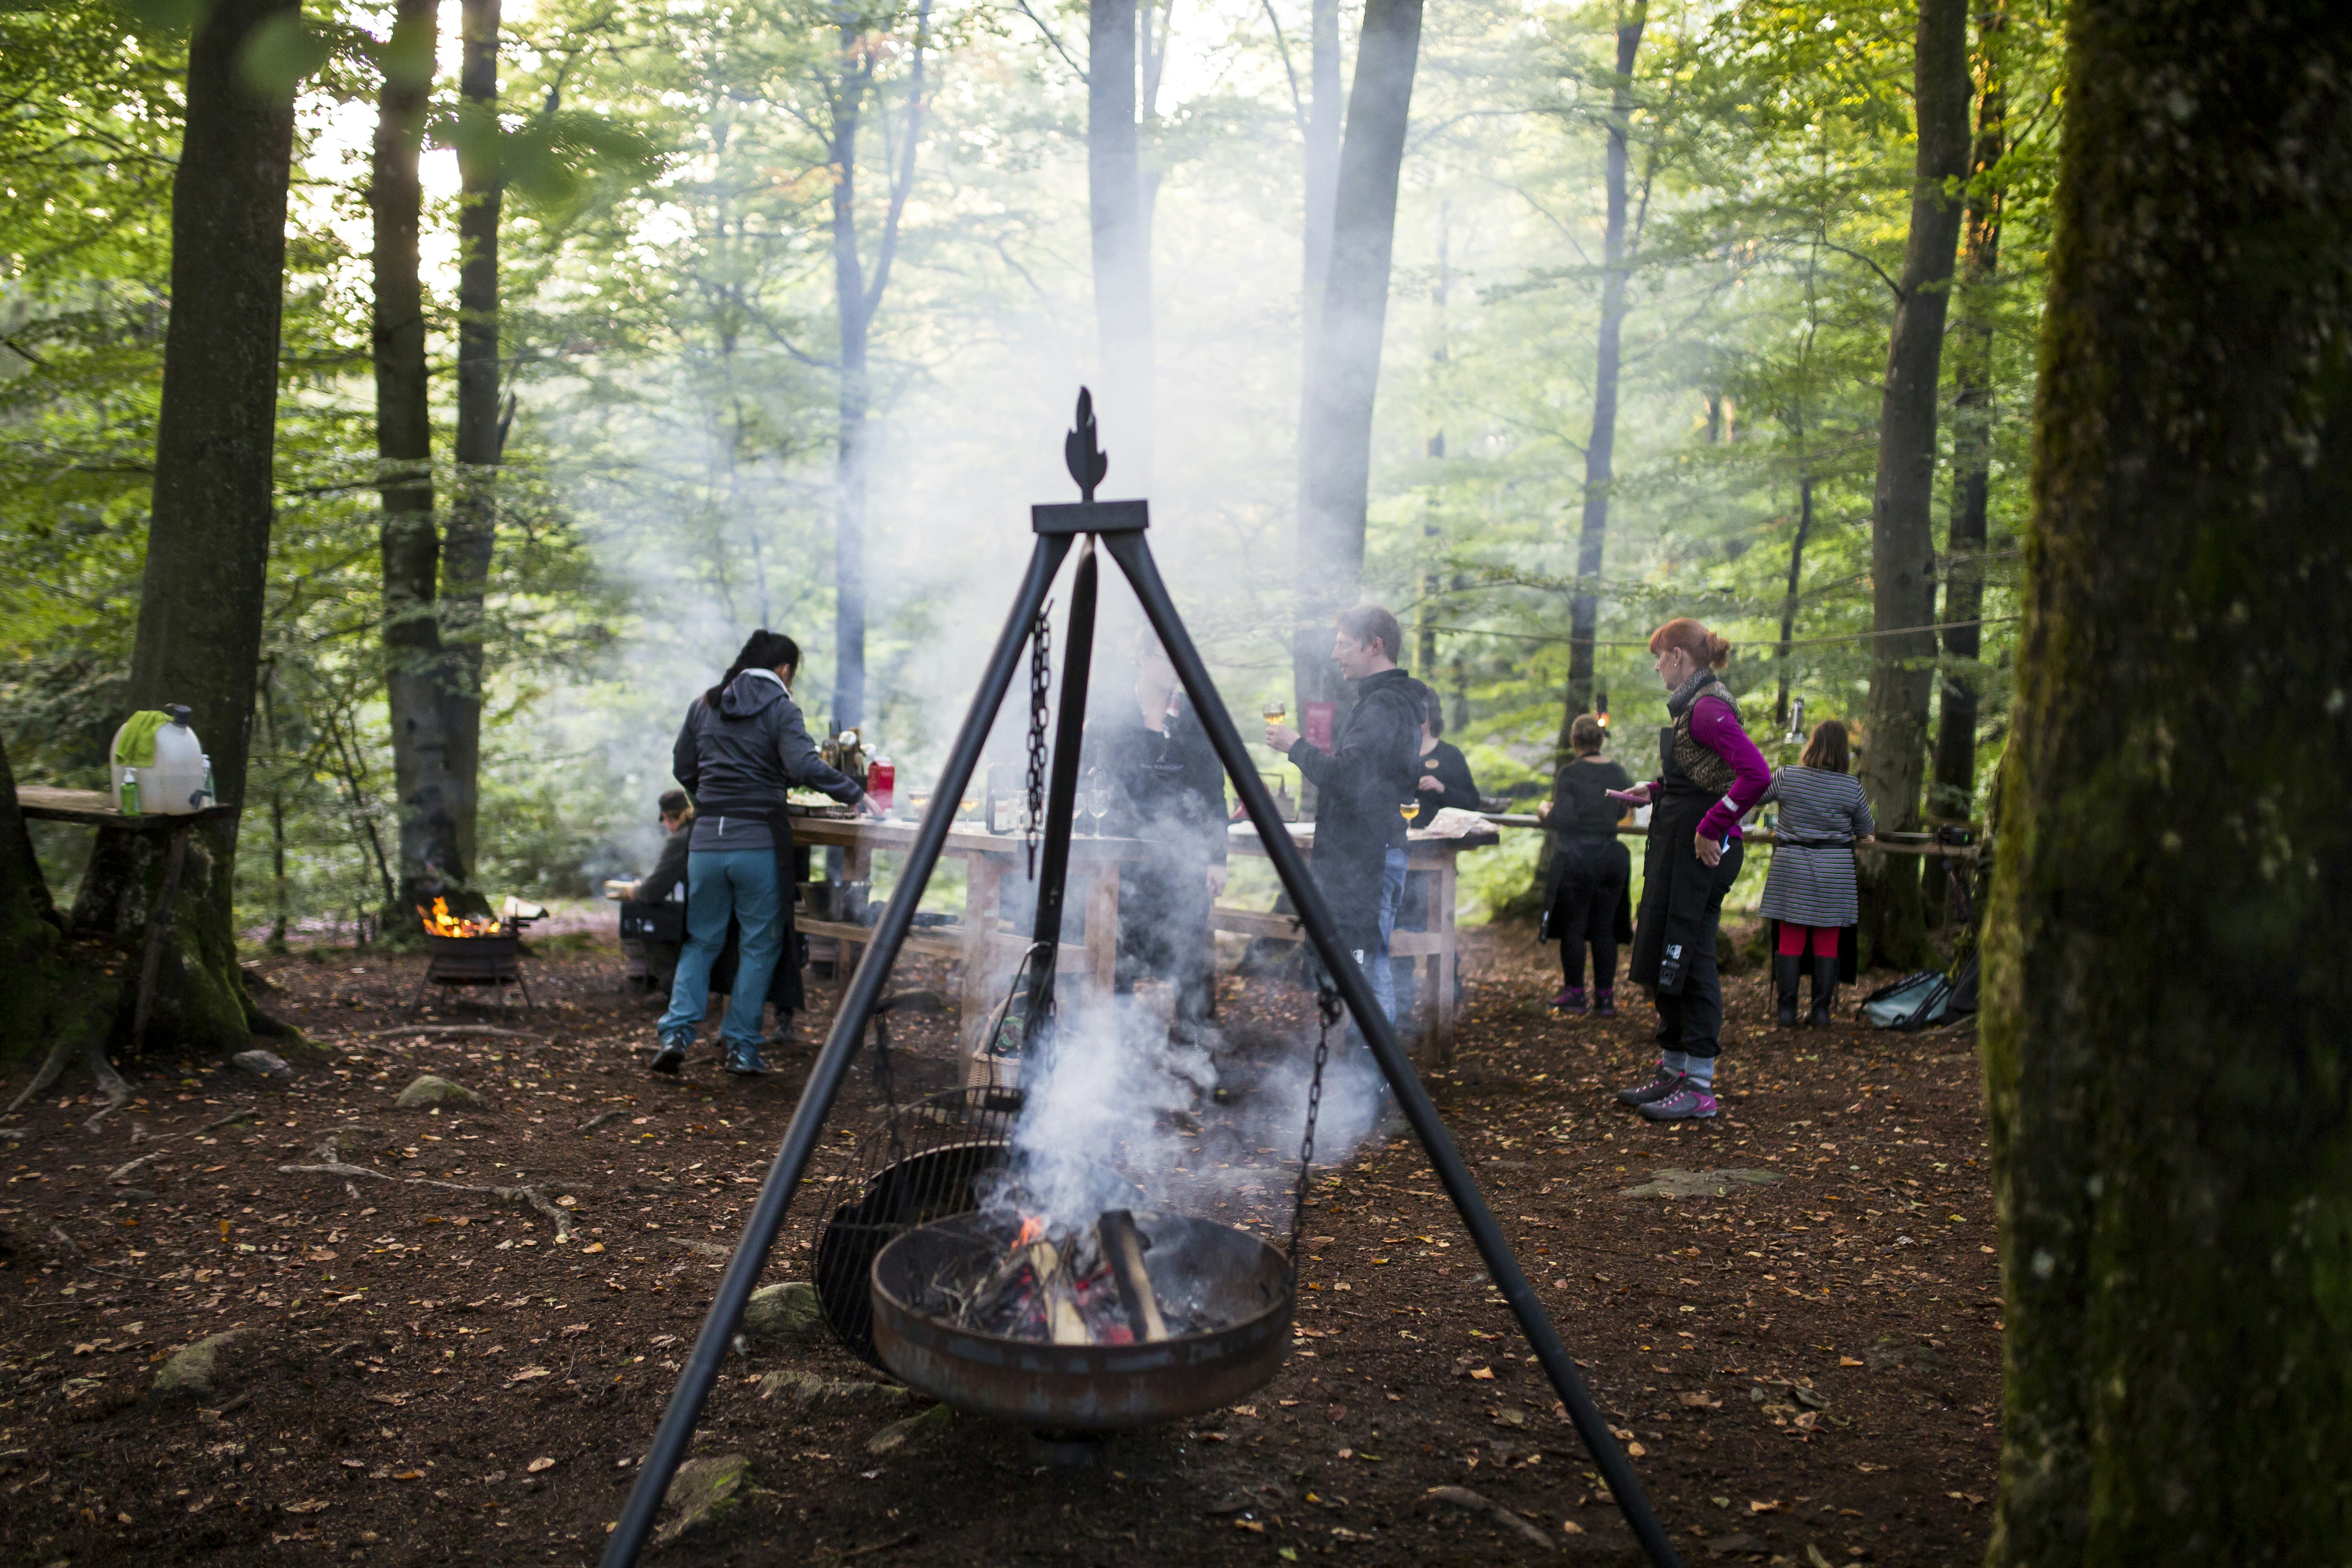 A group of eight to ten gathers around wooden tables in a forest grove, holding beverages and watching the smoke rise from a large metal cooking tripod in the center of the frame. Suspended from the tripod by three chains is a metal fire pan with burning logs. In the distance, another raised fire pit burns brightly.